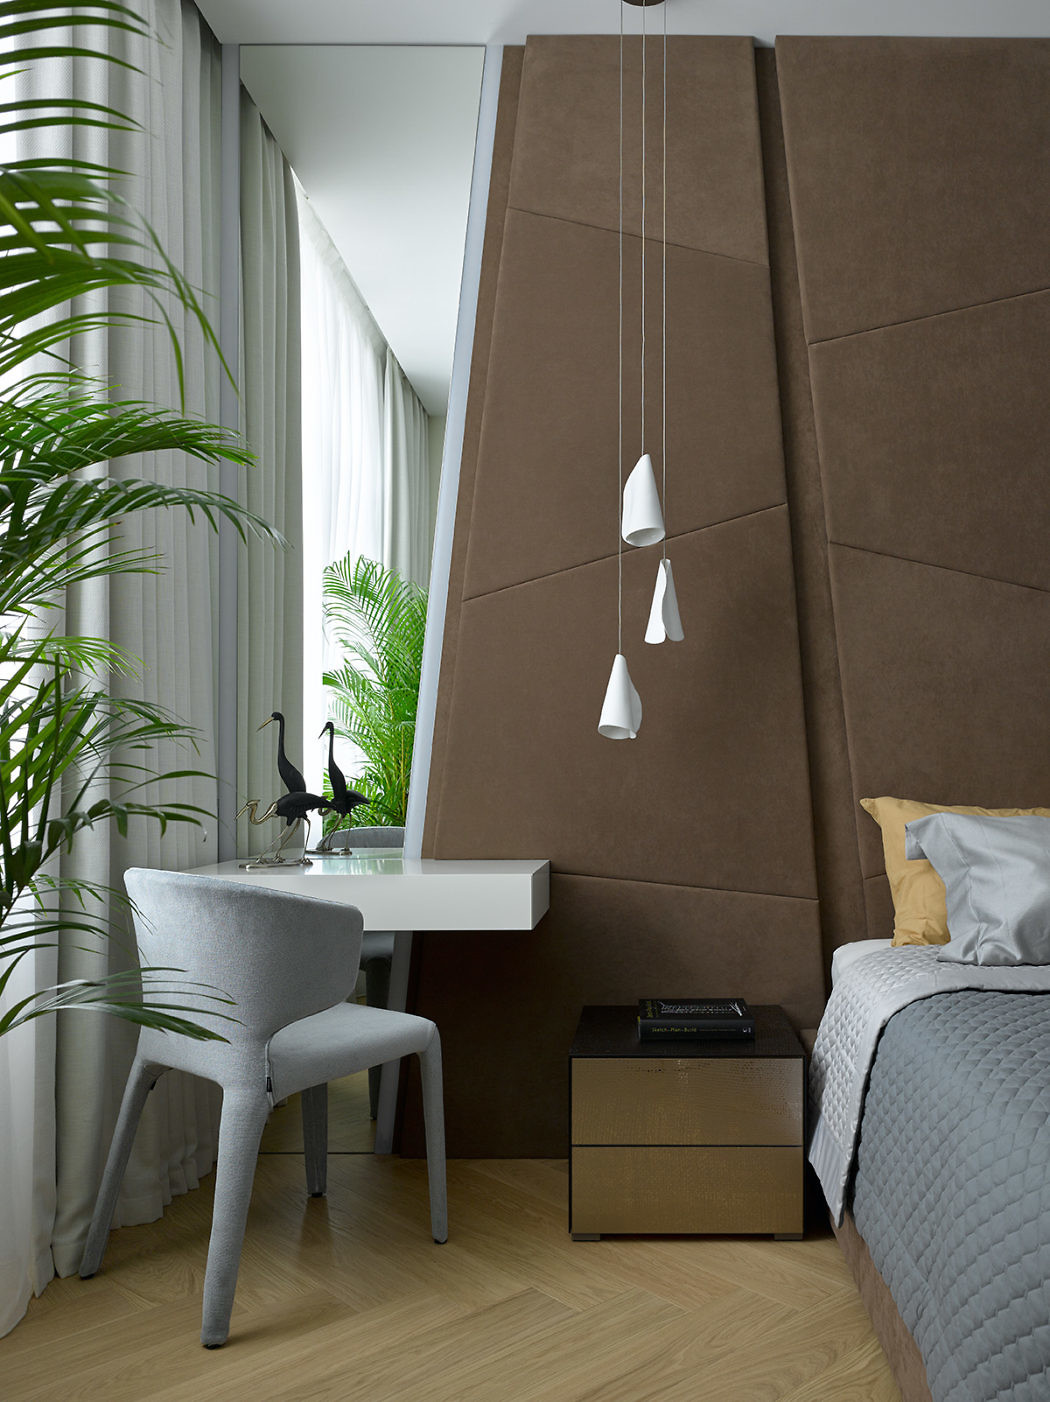 Modern bedroom with a study nook, upholstered wall panel, and pendant lights